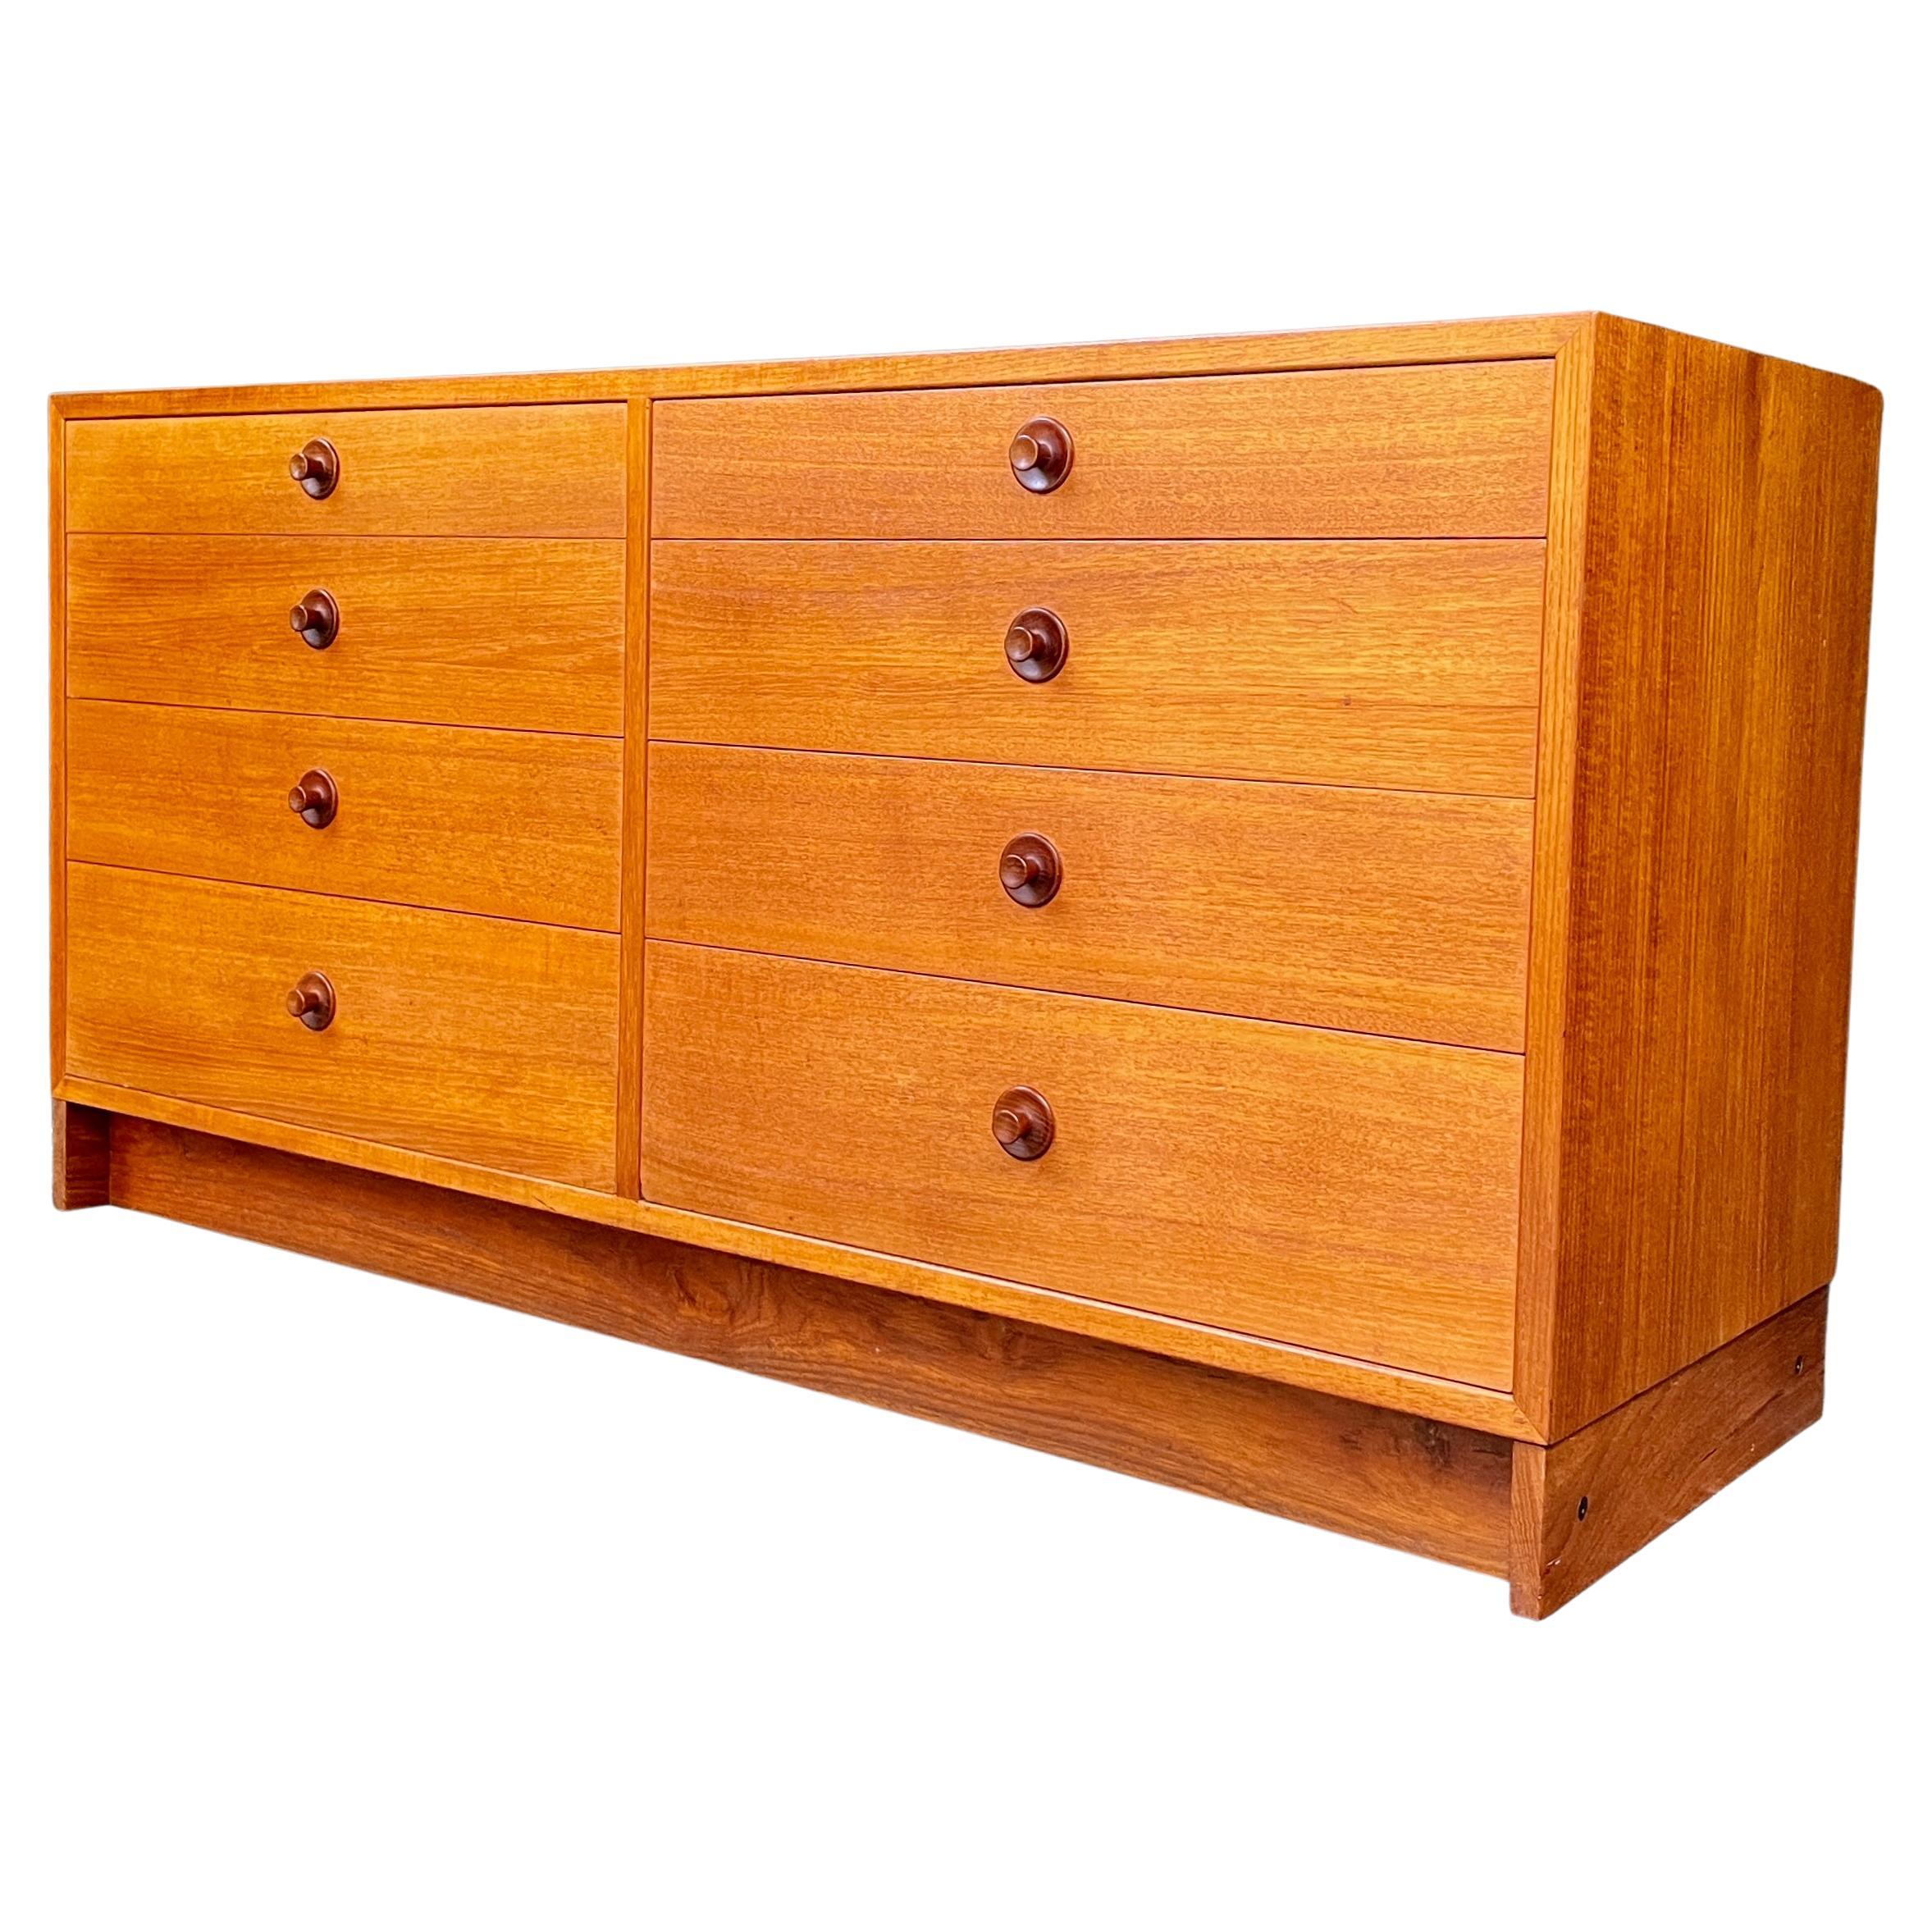 1960s Teak Dresser Scandes Mountain Cabin Chest of Drawers For Sale